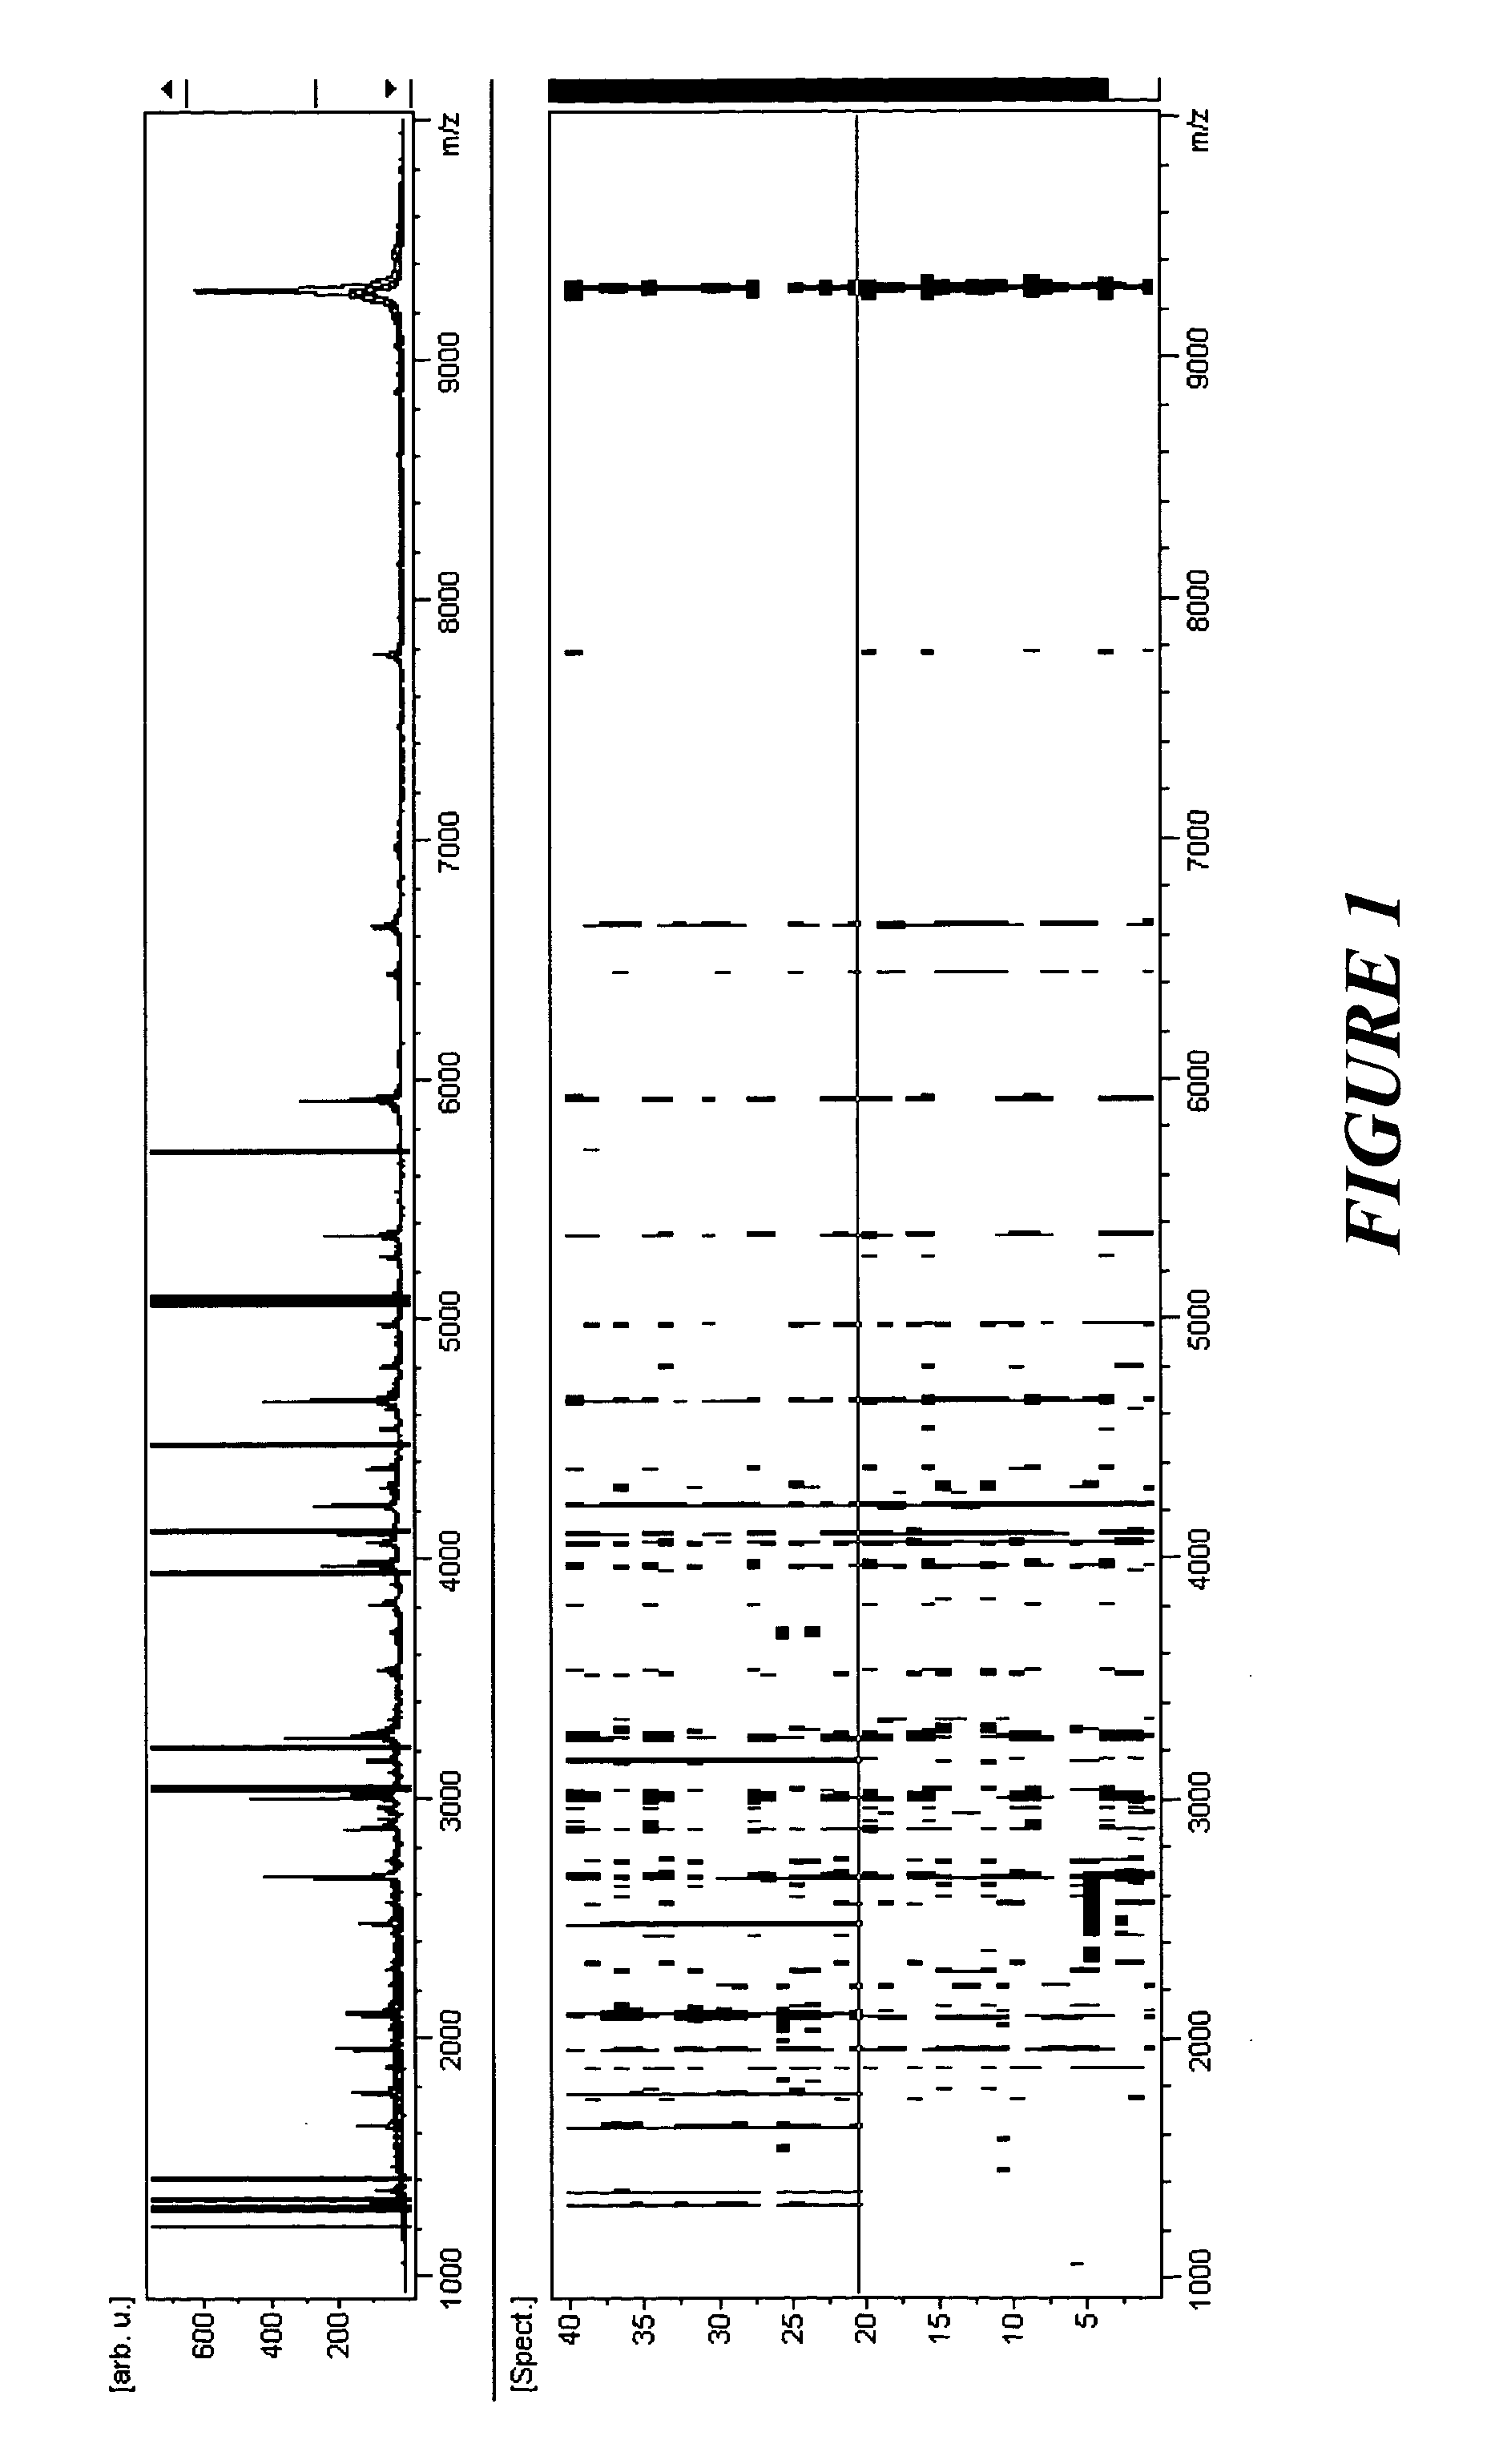 Graphical displaying of and pattern recognition in analytical data strings